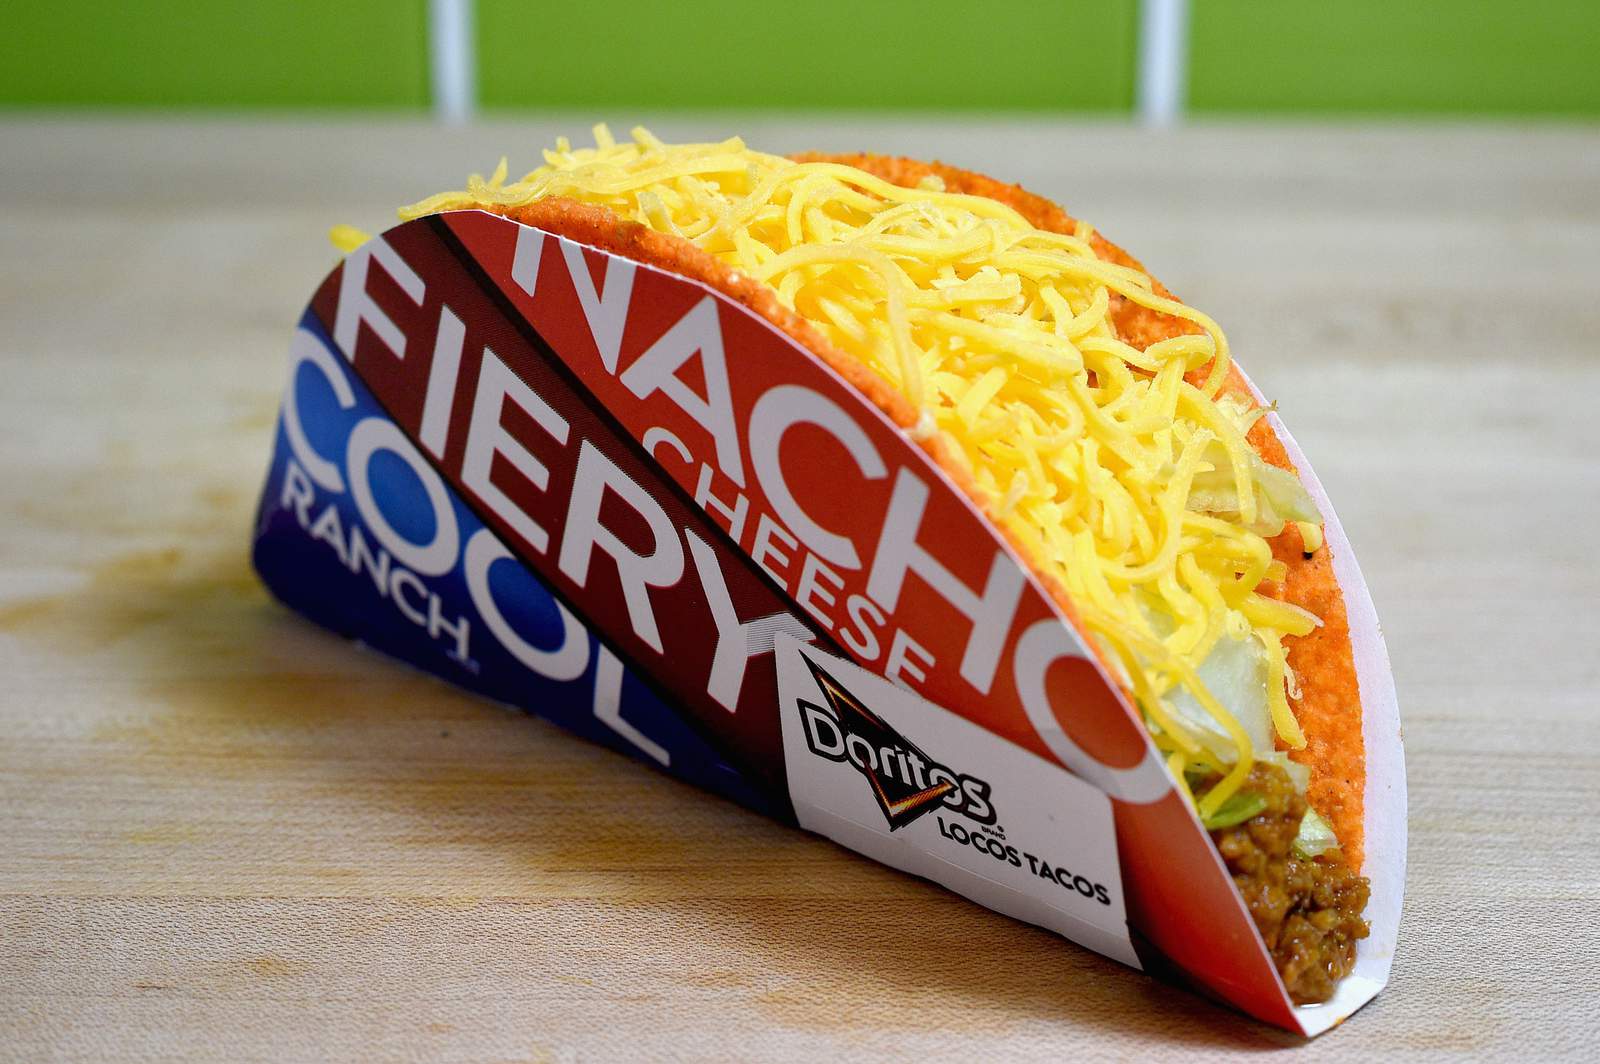 Taco Bell offering free taco for World Series stolen base